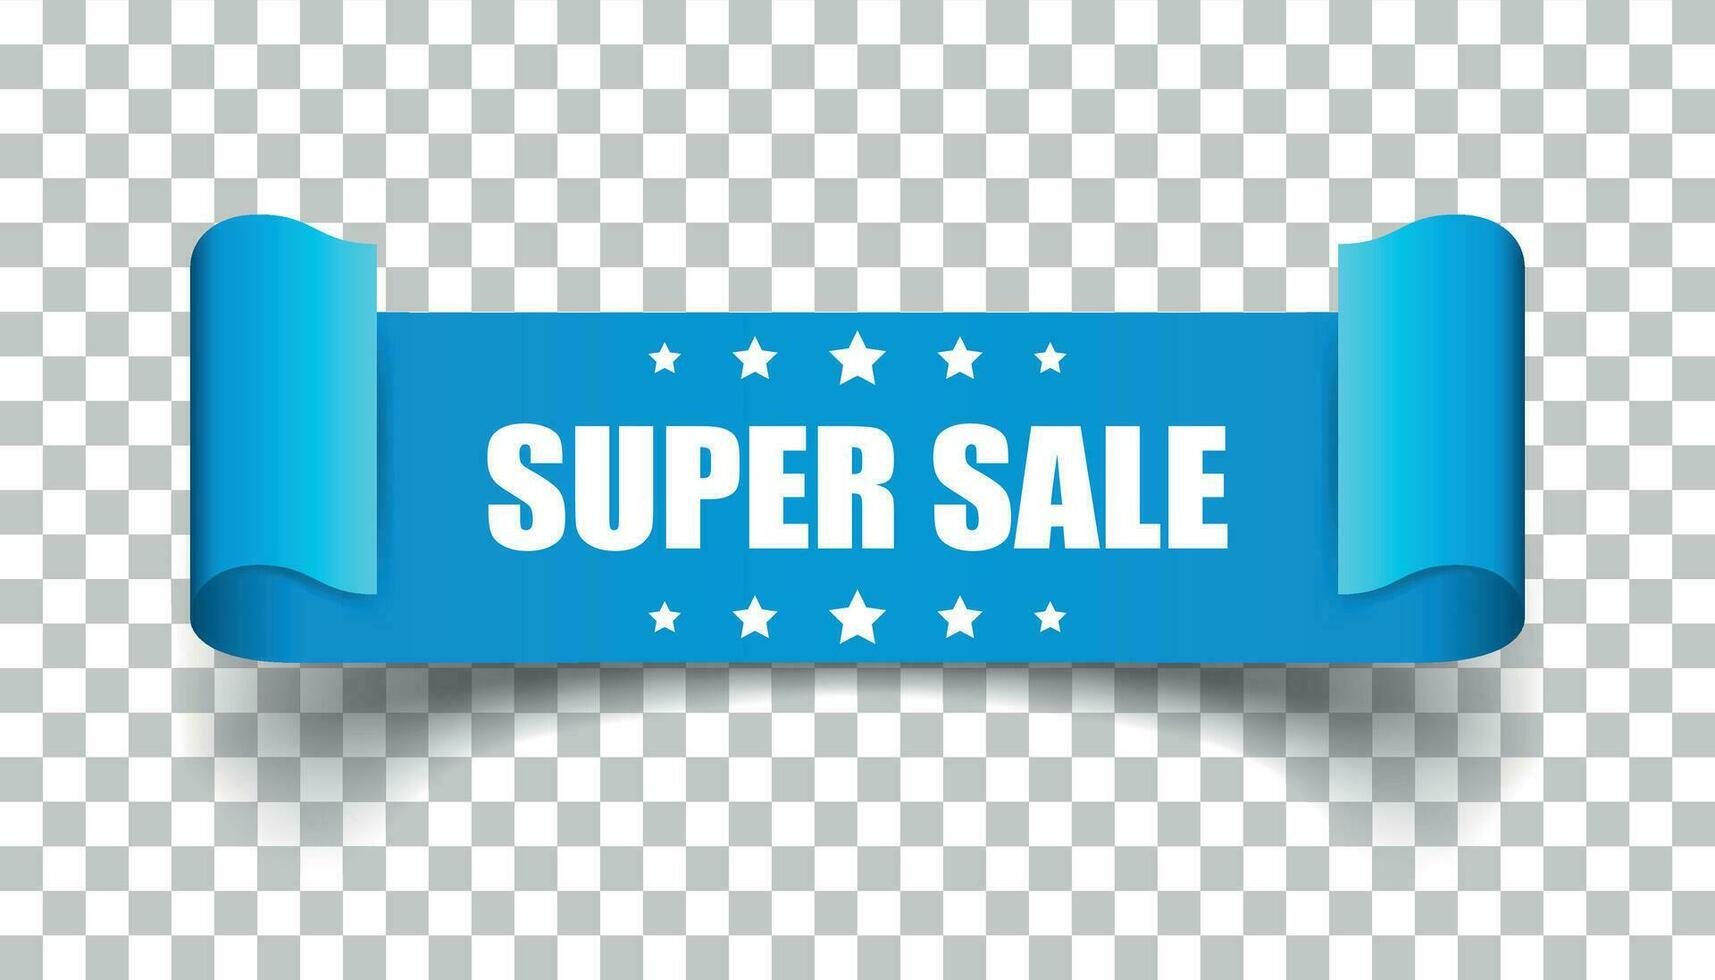 Super sale ribbon vector icon. Discount sticker label on isolated background.